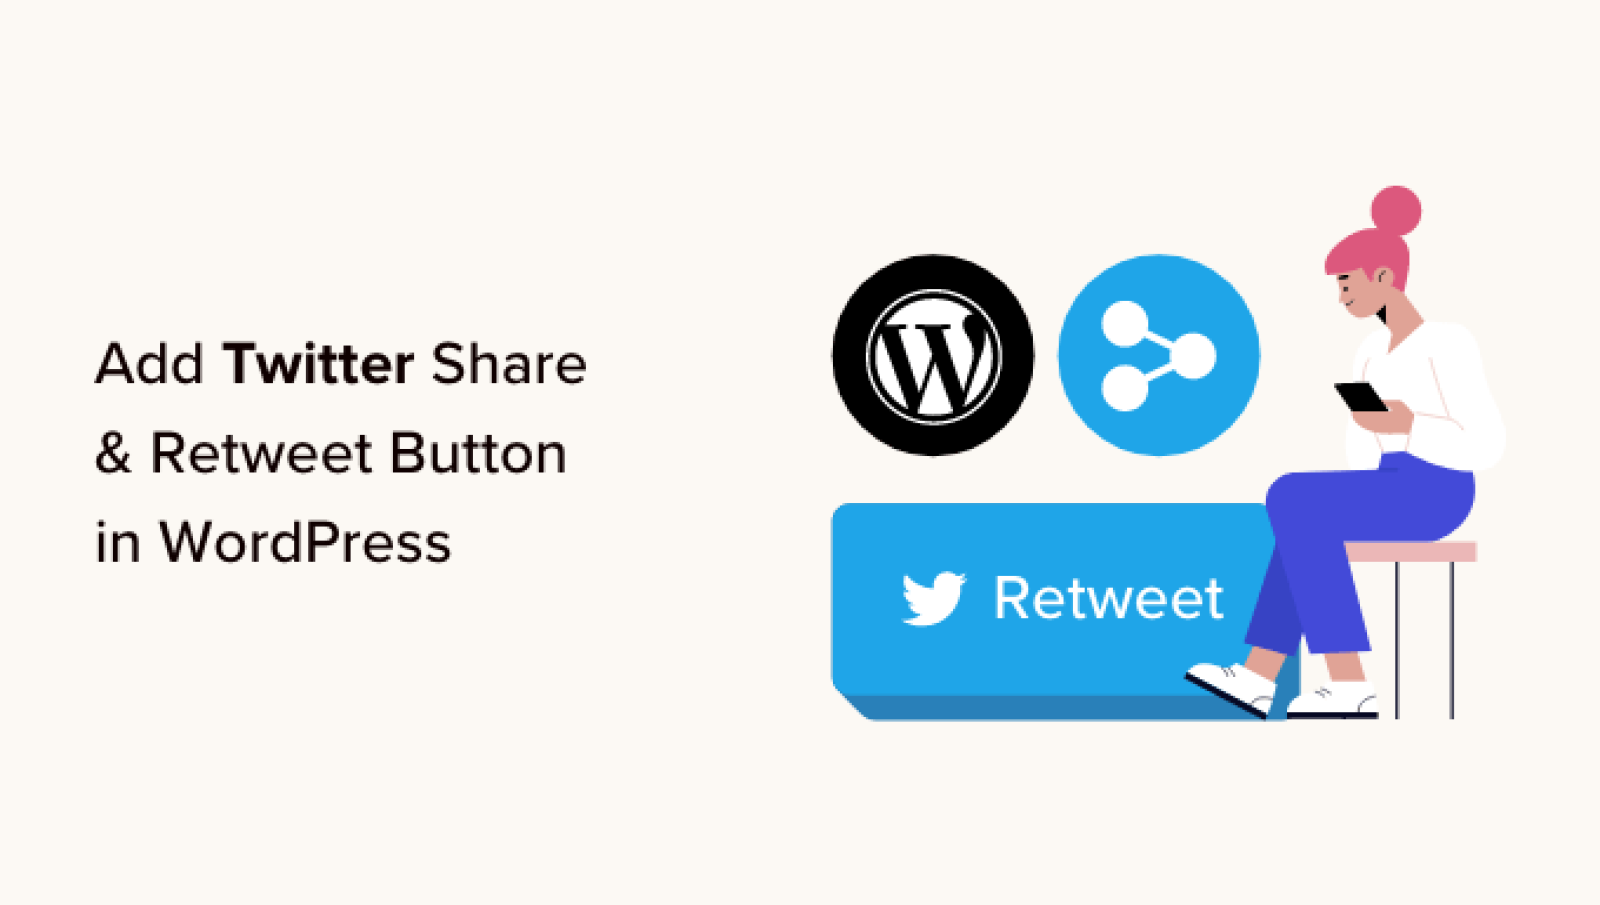 Find out how to Add Twitter Share and Retweet Button in WordPress